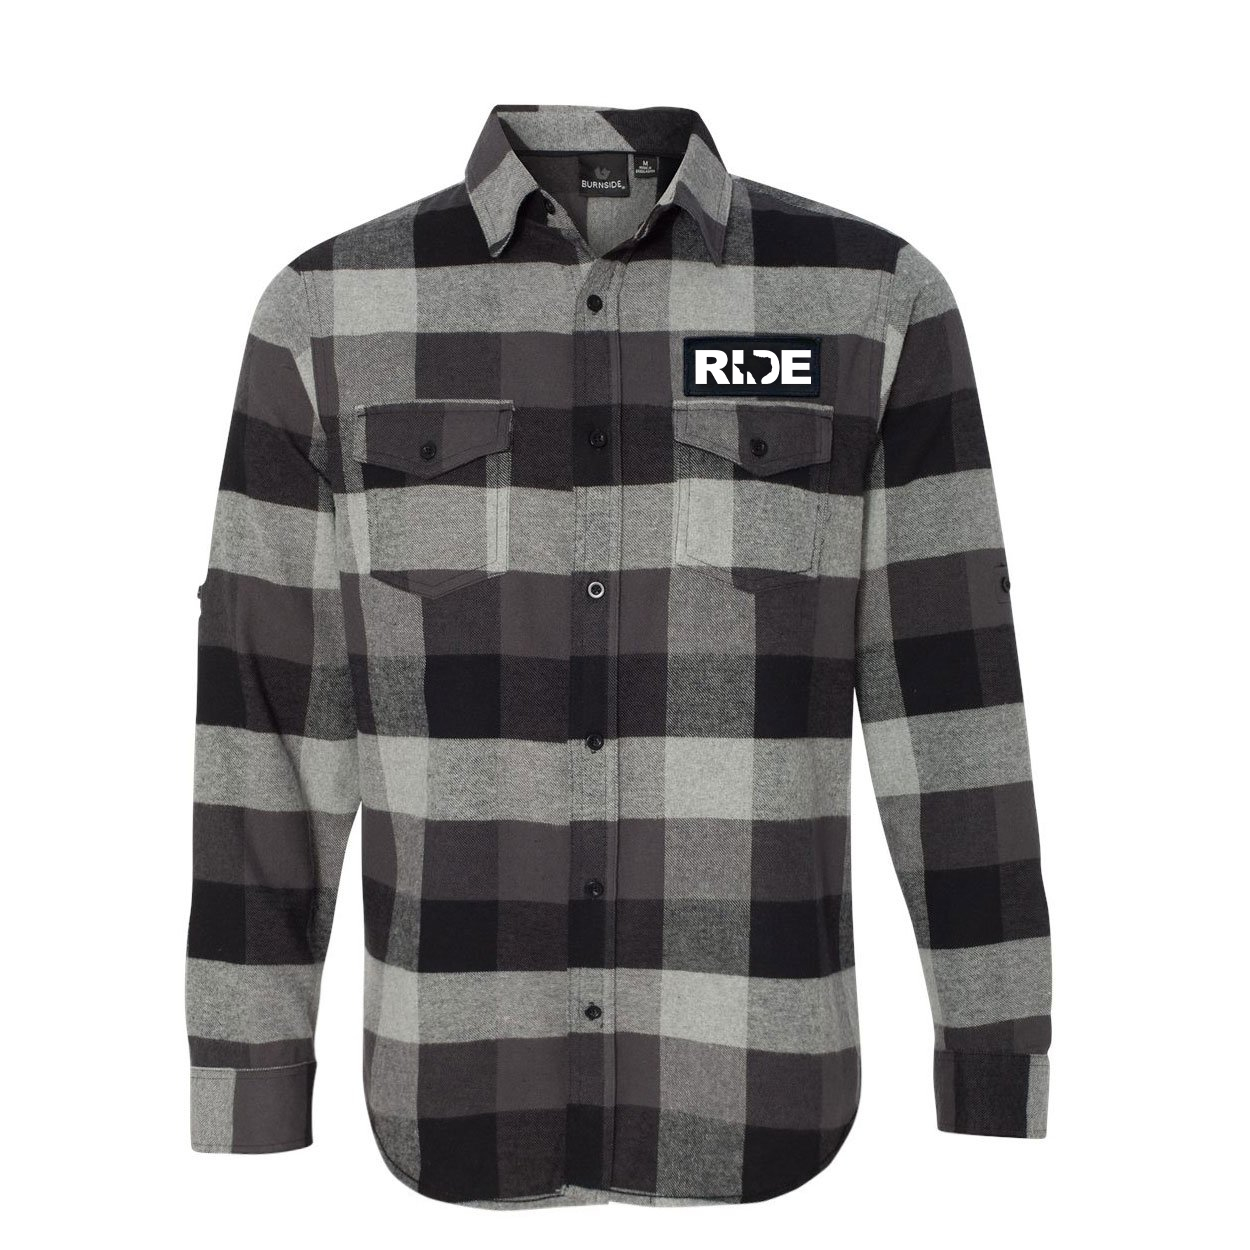 Ride Texas Classic Unisex Long Sleeve Woven Patch Flannel Shirt Black/Gray (White Logo)